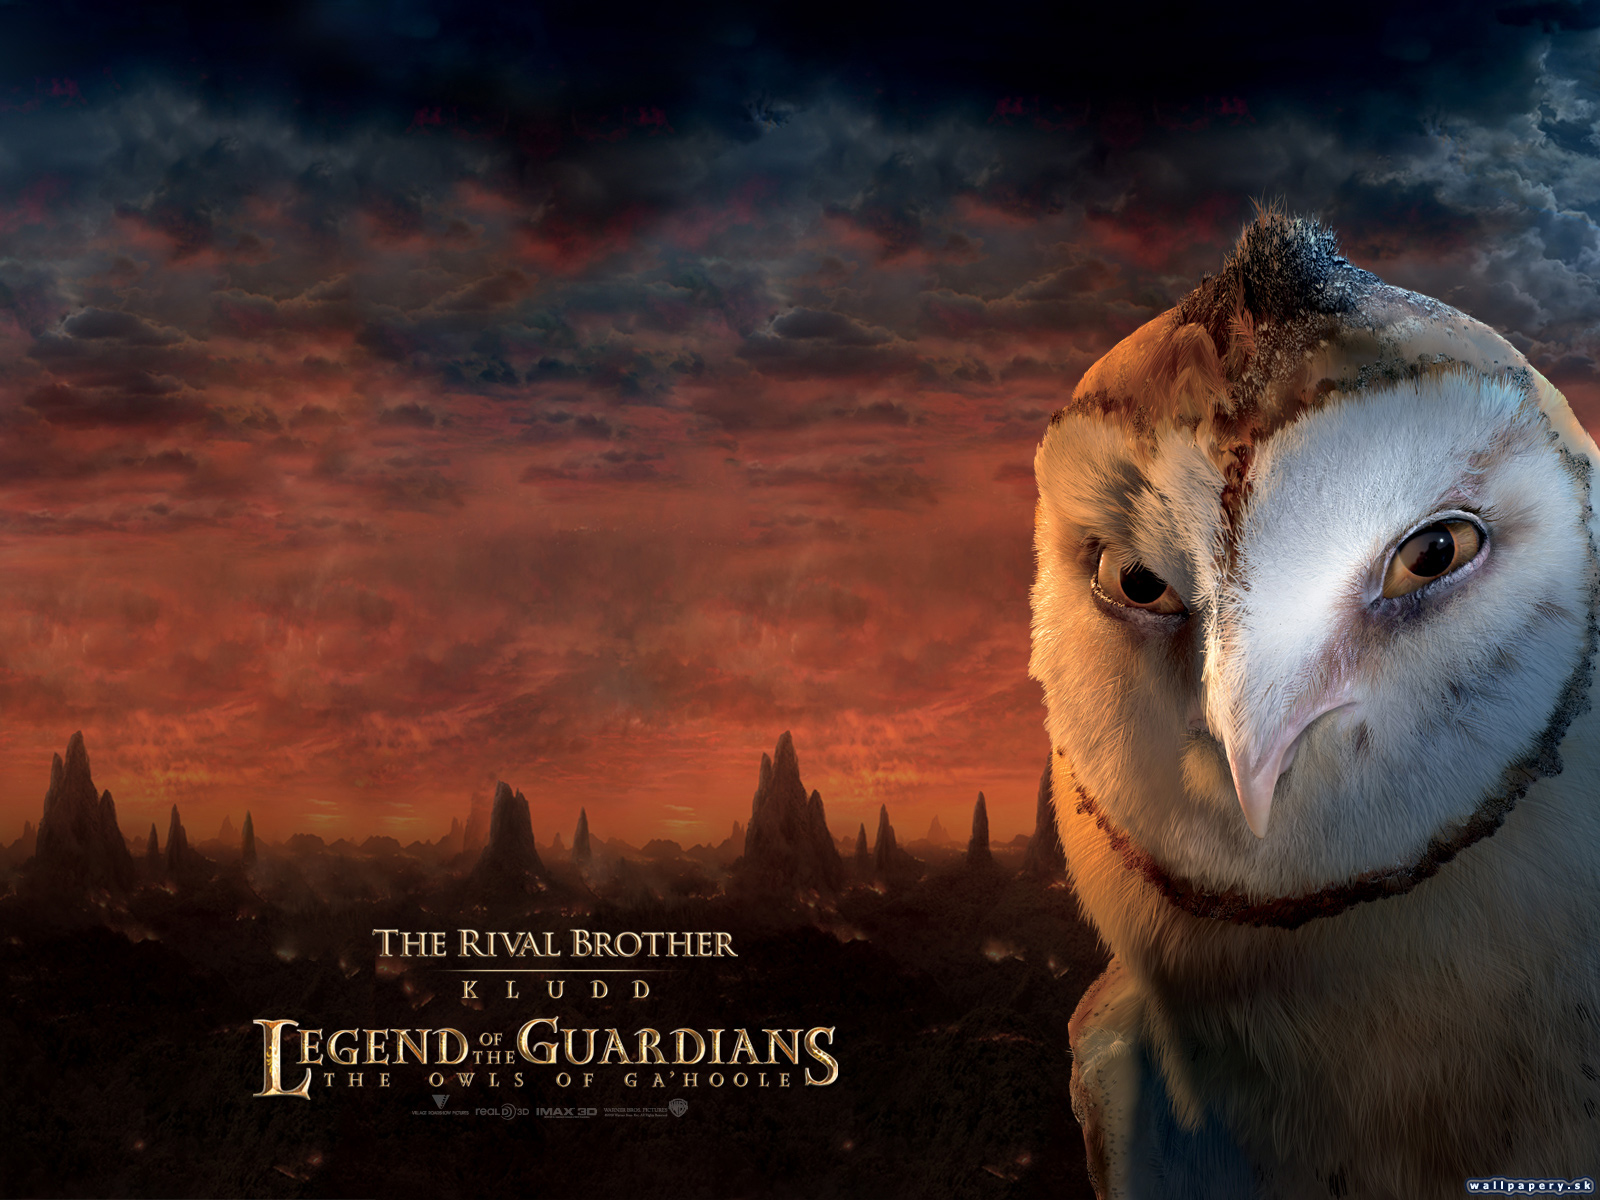 Legend of the Guardians: The Owls of Ga'Hoole - wallpaper 4